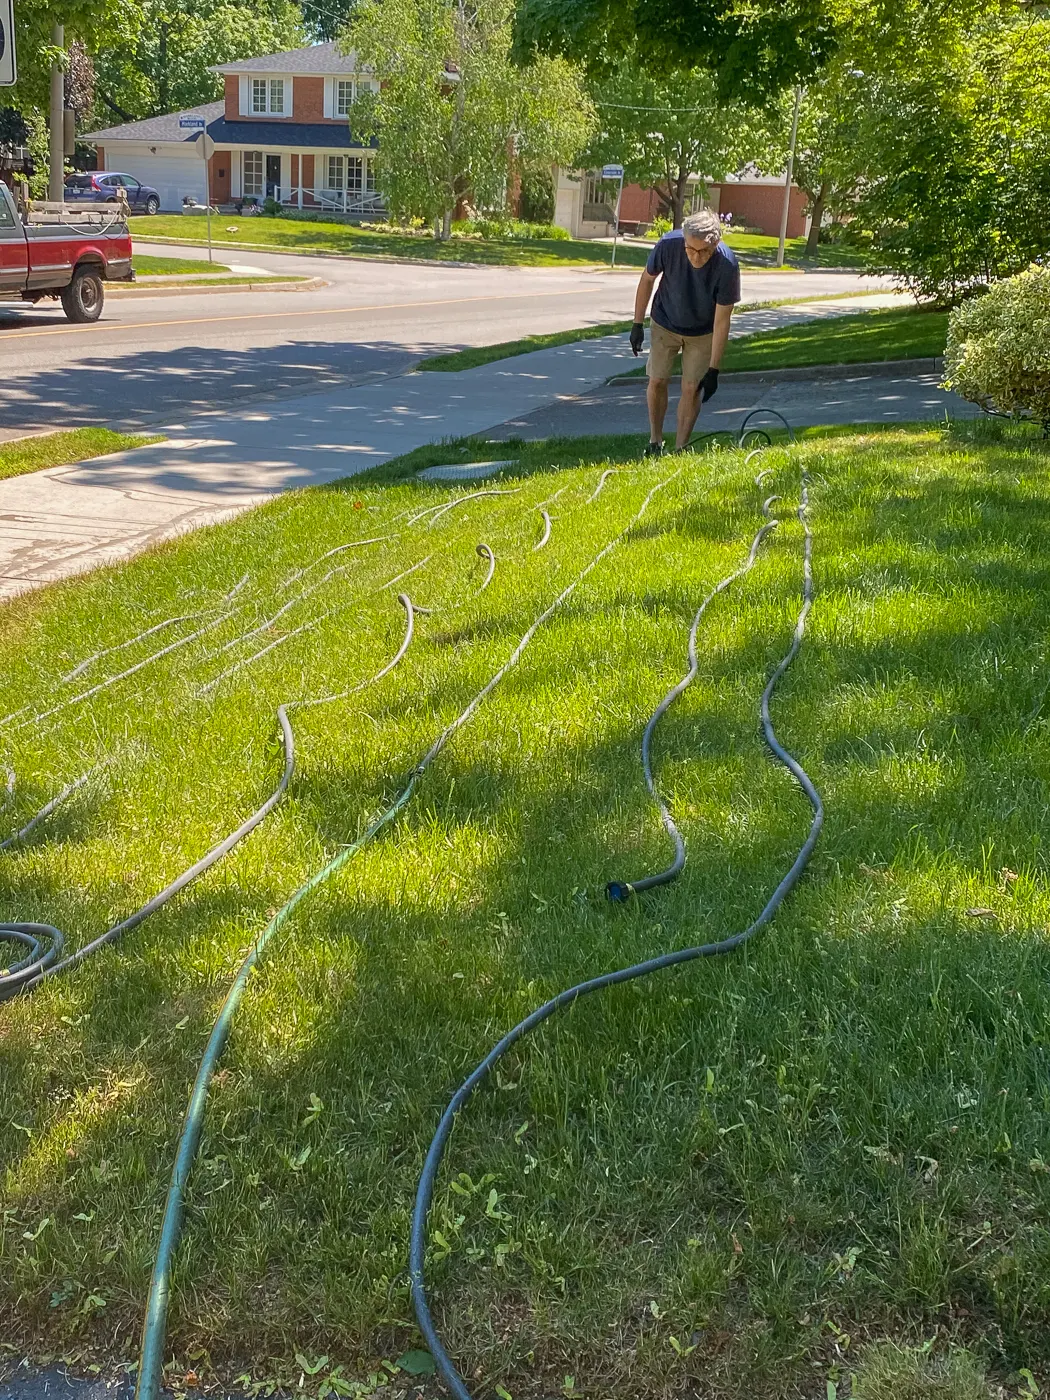 how to set up a soaker hose system, garden soaker hose, soaker hose watering system, how to water garden with soaker hose